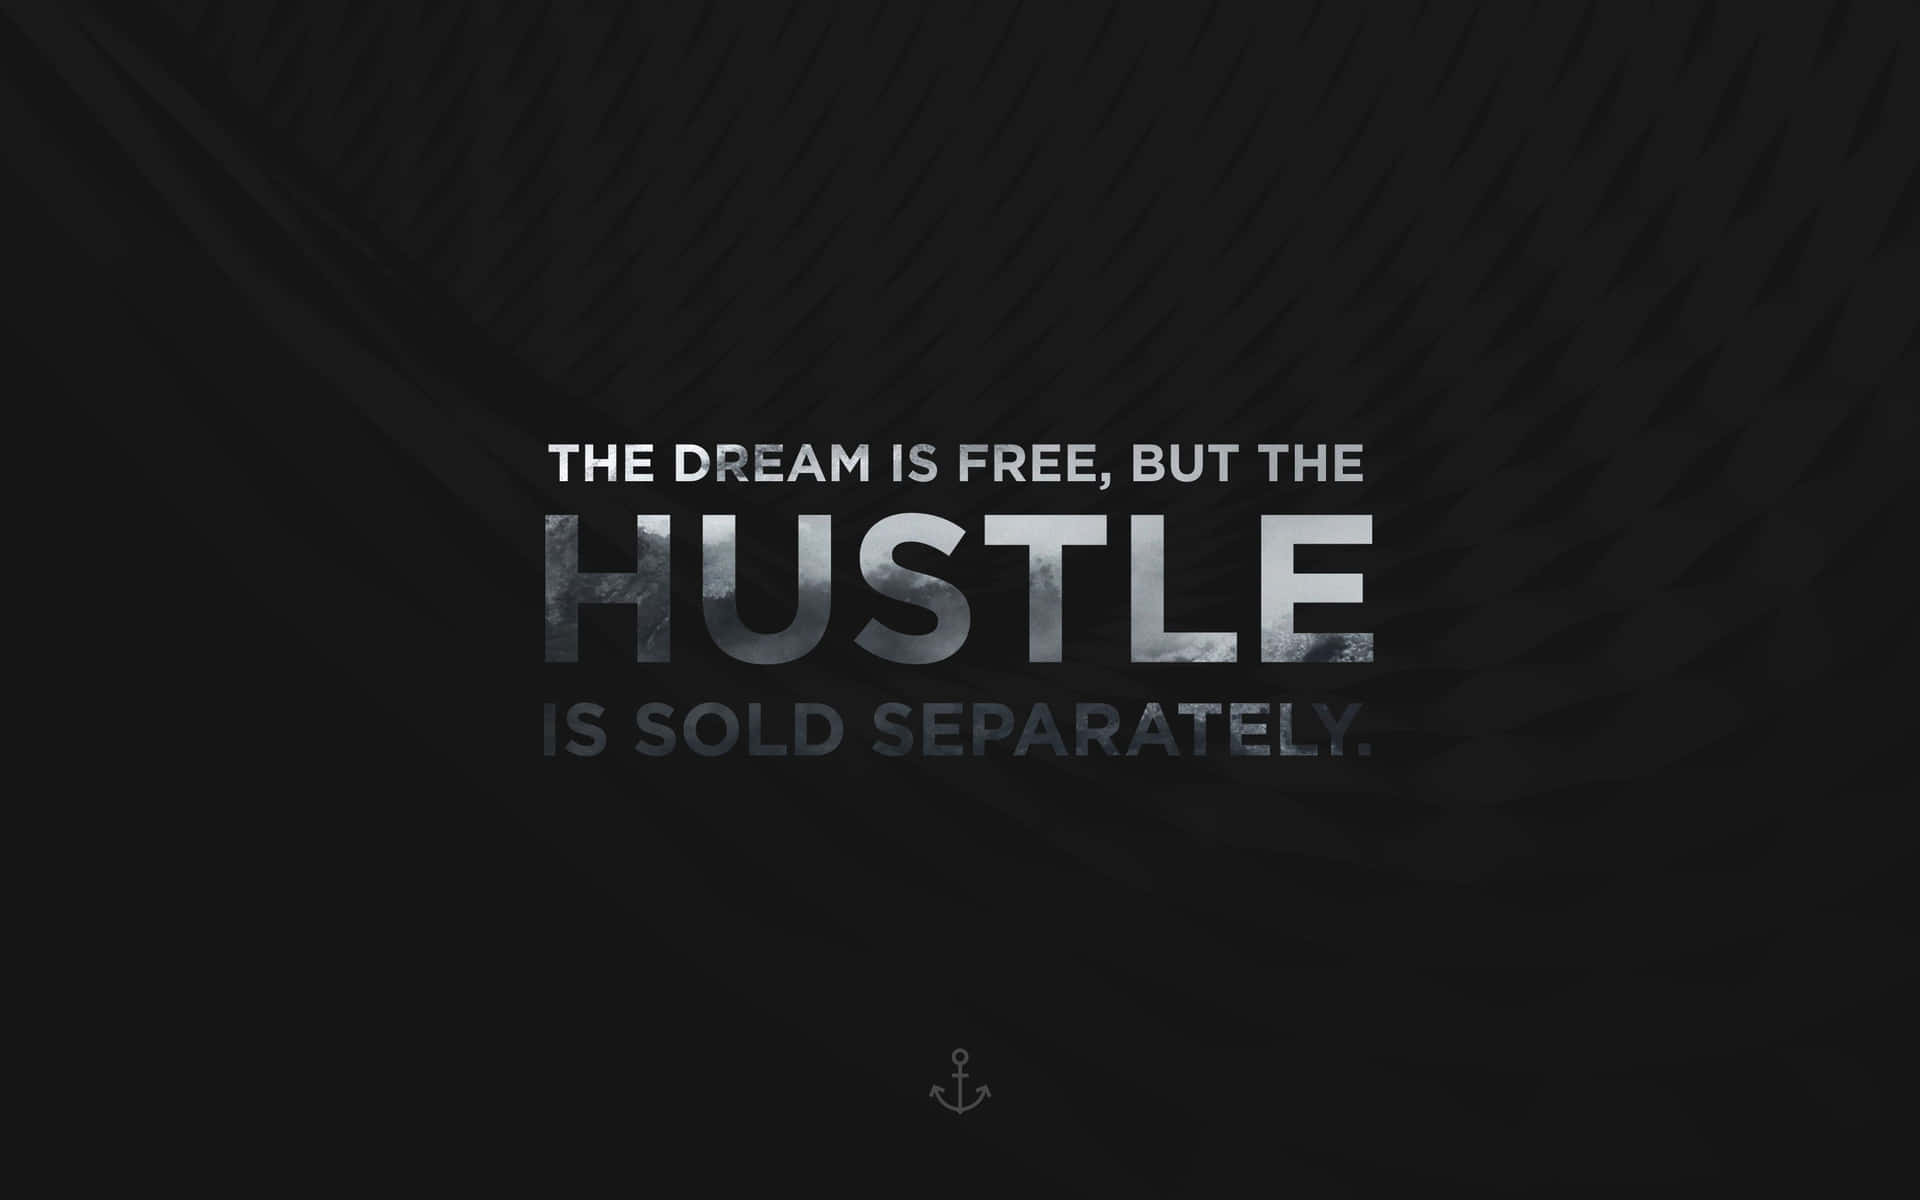 Get the most out of your experience with Hustler. Wallpaper